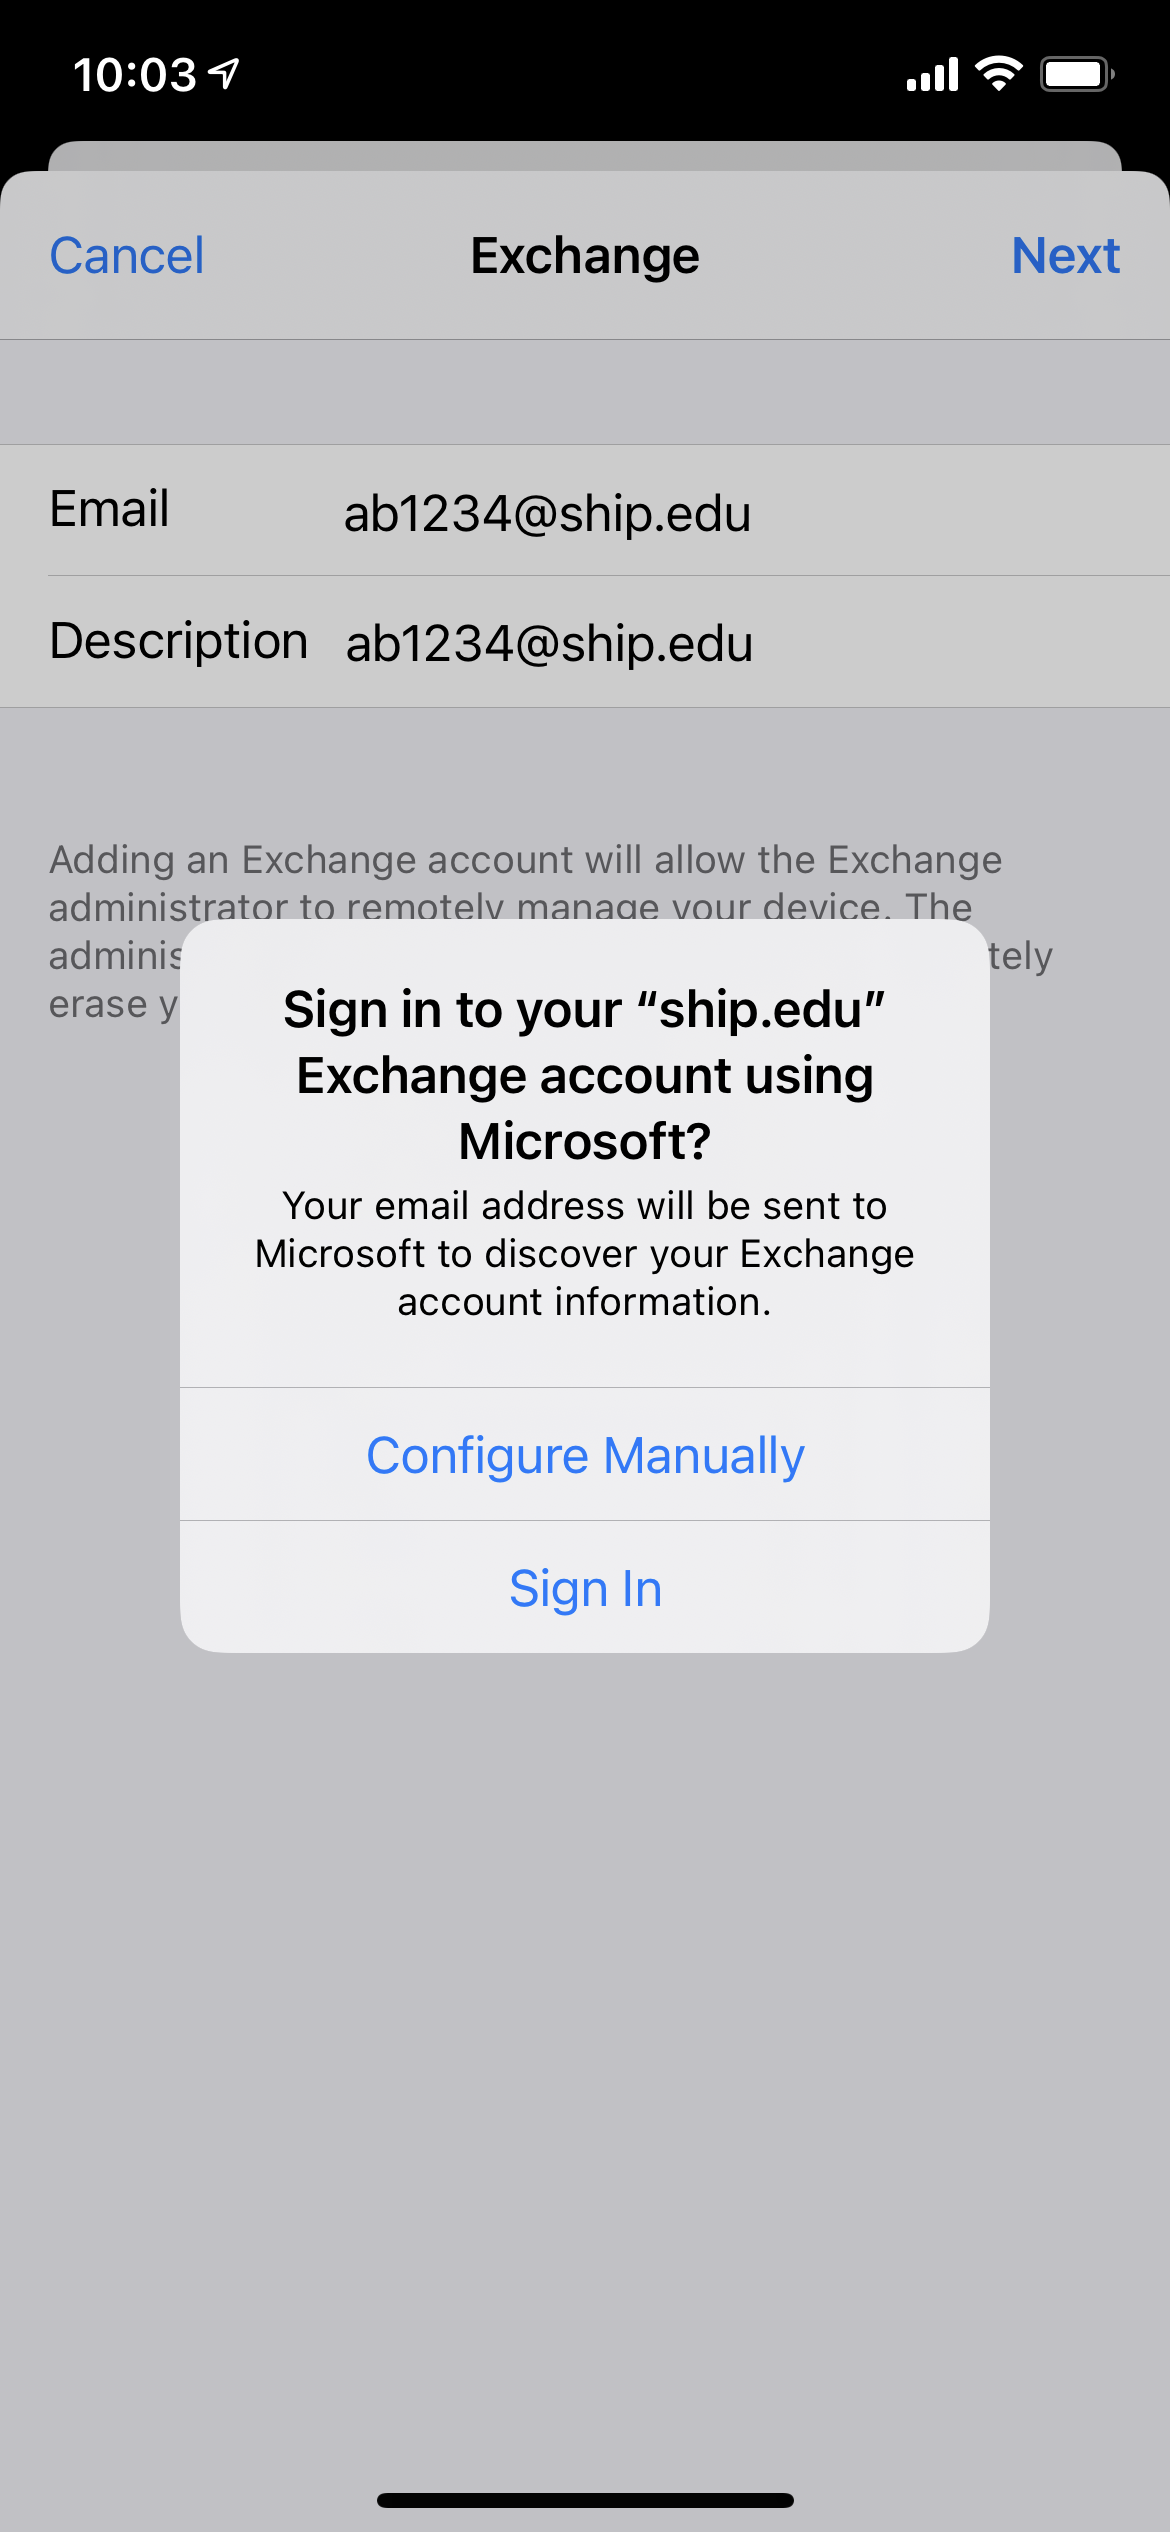 Sign into your ship.edu account